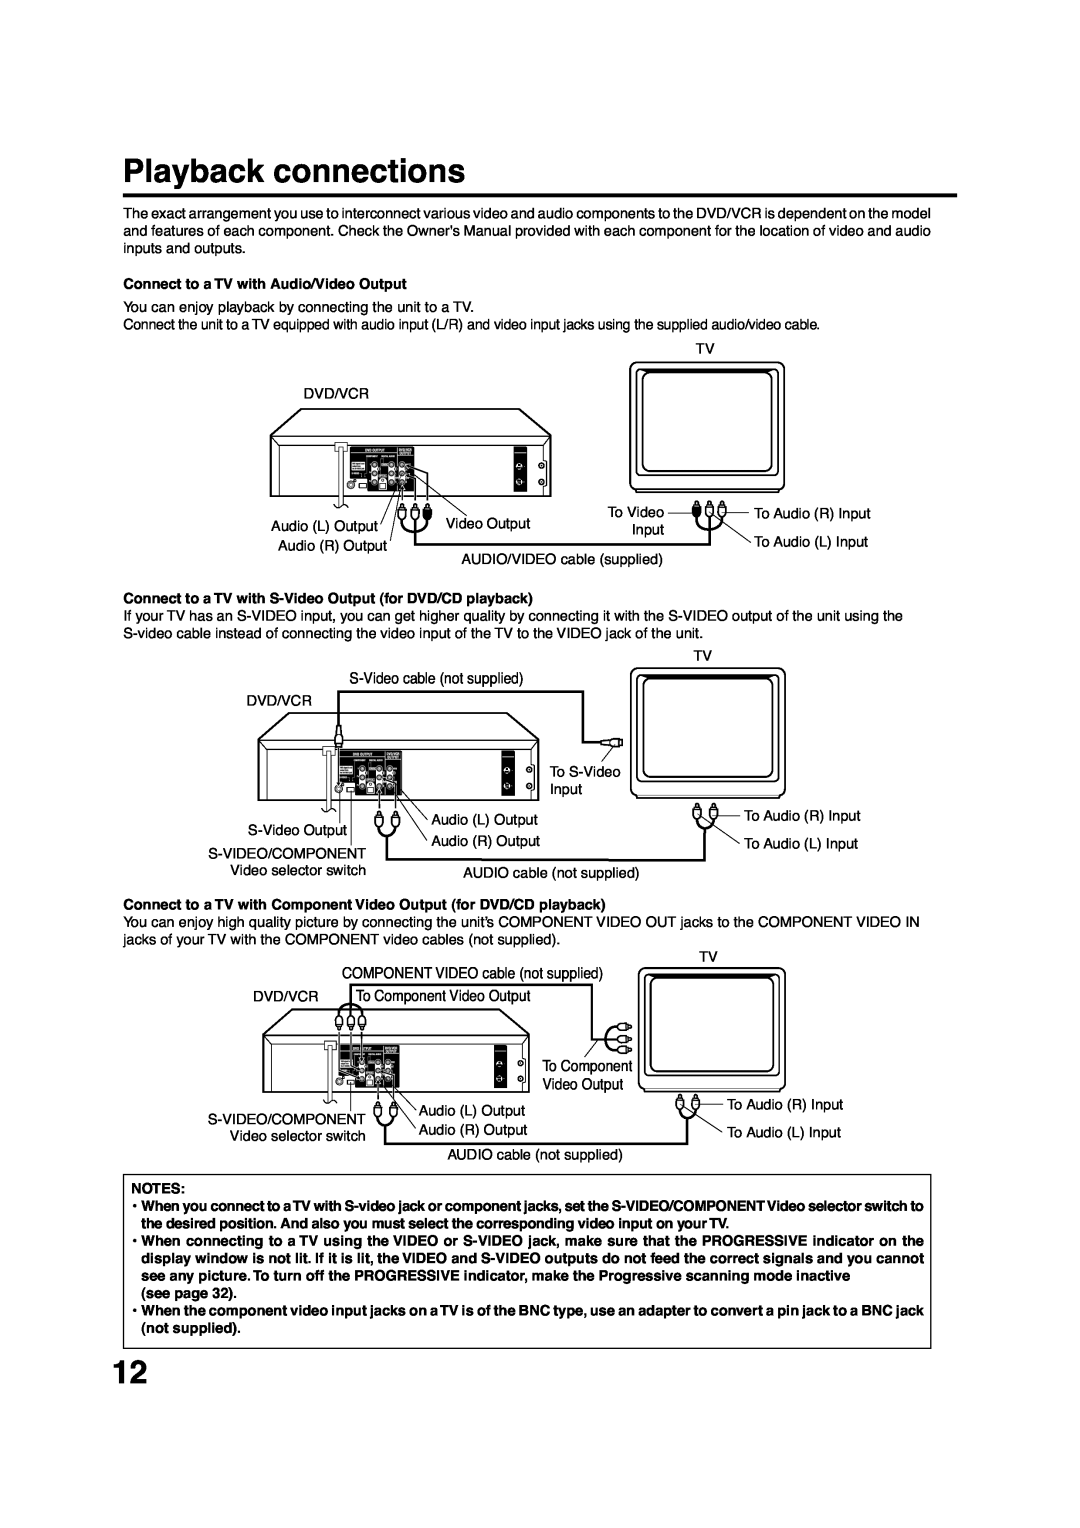 Pioneer DV-PT100 operating instructions Playback connections, Connect to a TV with Audio/Video Output, see page 